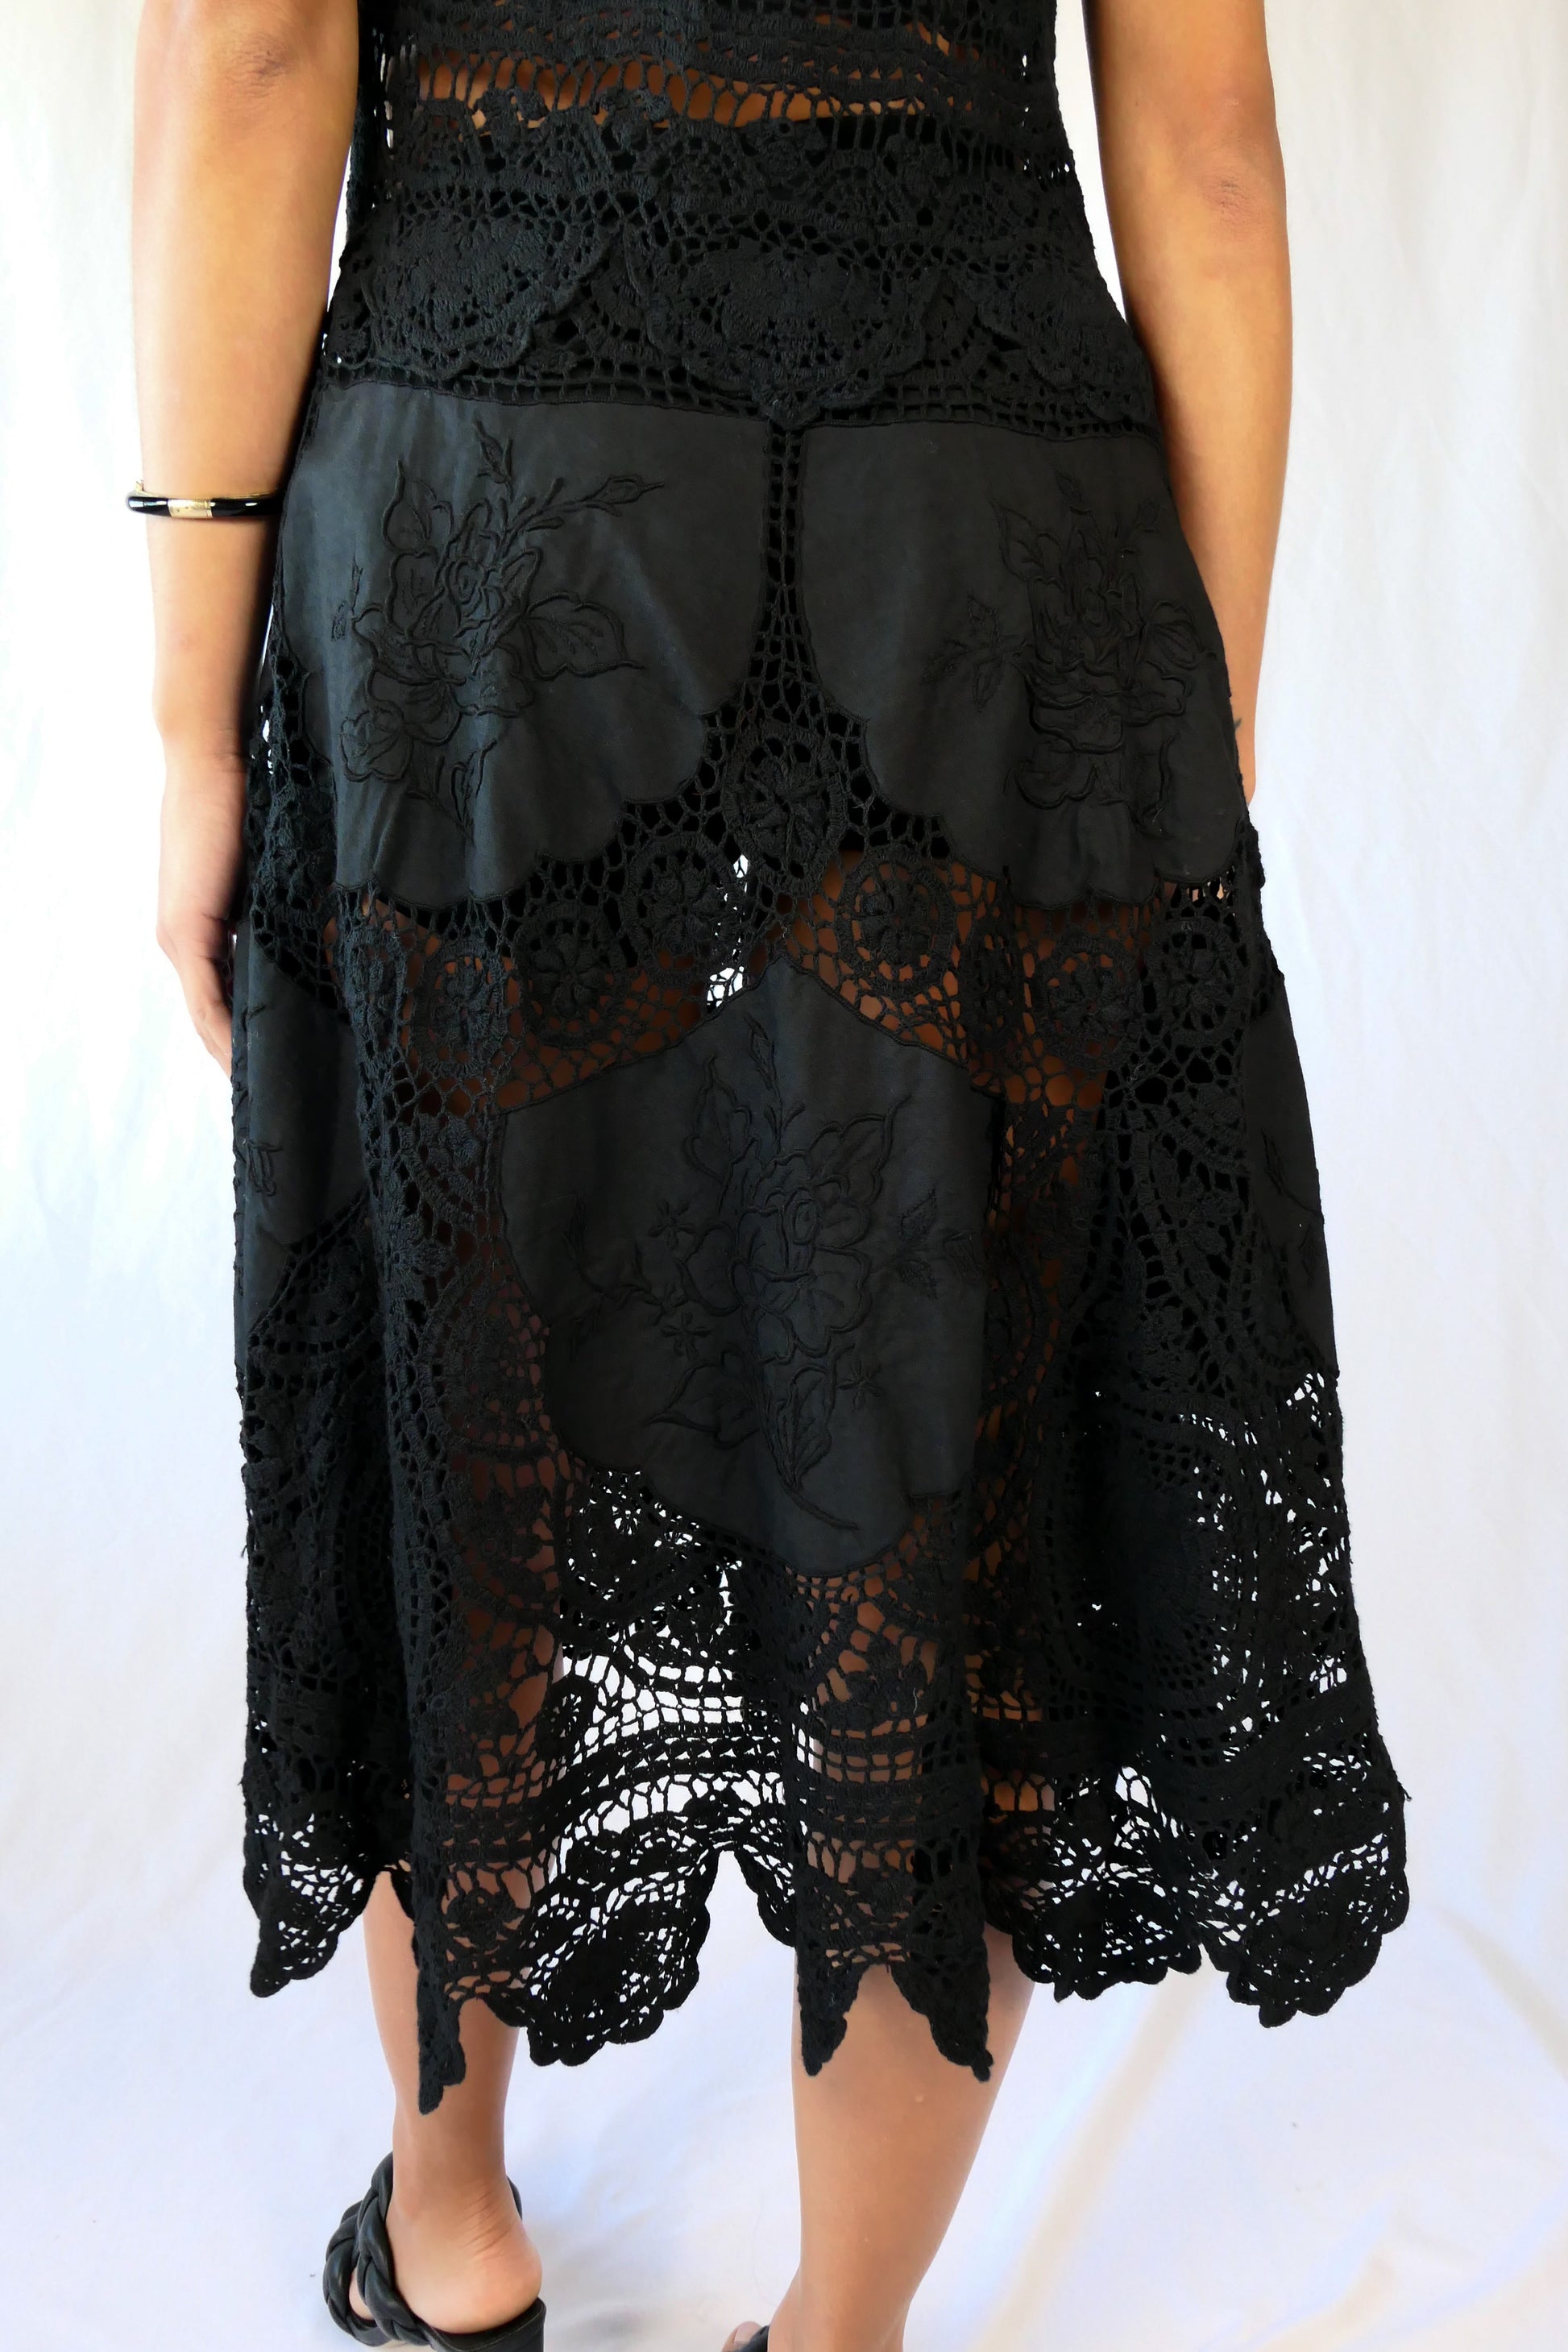 Skirt detail of the back. This Little Black Dress with detailed hand crochet and embroidery work lends itself a vintage flair.  The dress can be buttoned up the front or back, has a flattering fit at the waist, and flares out towards the hem.  Wear it as a cocktail dress with black heels or sandals, or as a beach coverup.  